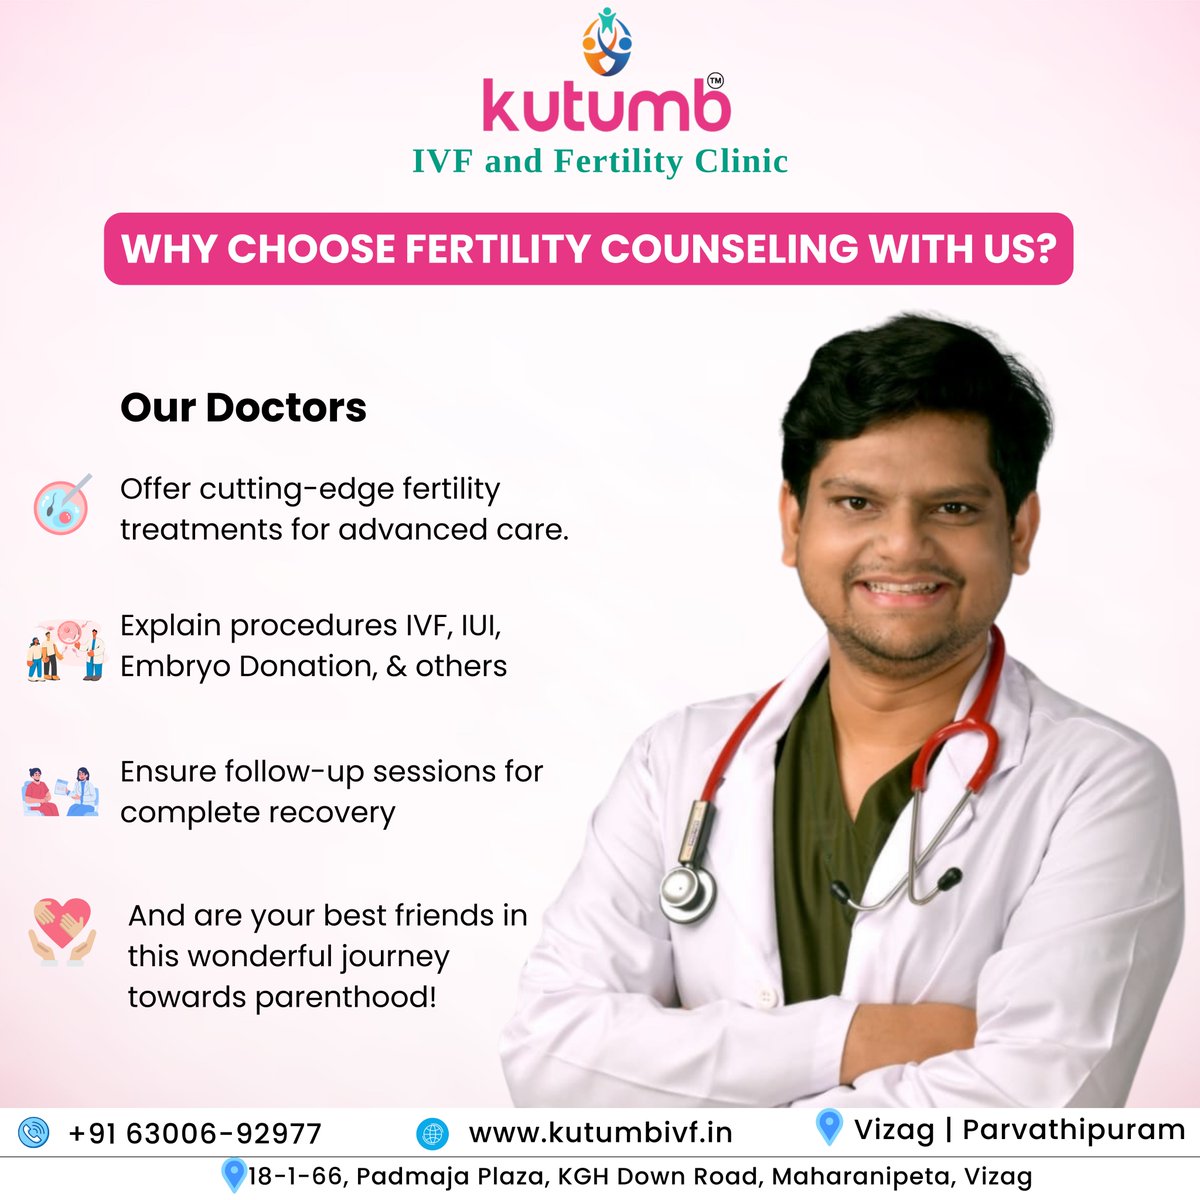 Choose fertility counseling with Kutumb IVF for a holistic approach to parenthood. Contact our expert now: +916300692977 #iui #iuitreatment #embryotransfer #pregnancy #parenthood #ivf #ivfcost #testtubebaby #testtubebabycentre #ivftreatment #ivftreatmentprocess #ivfclinic #vizag